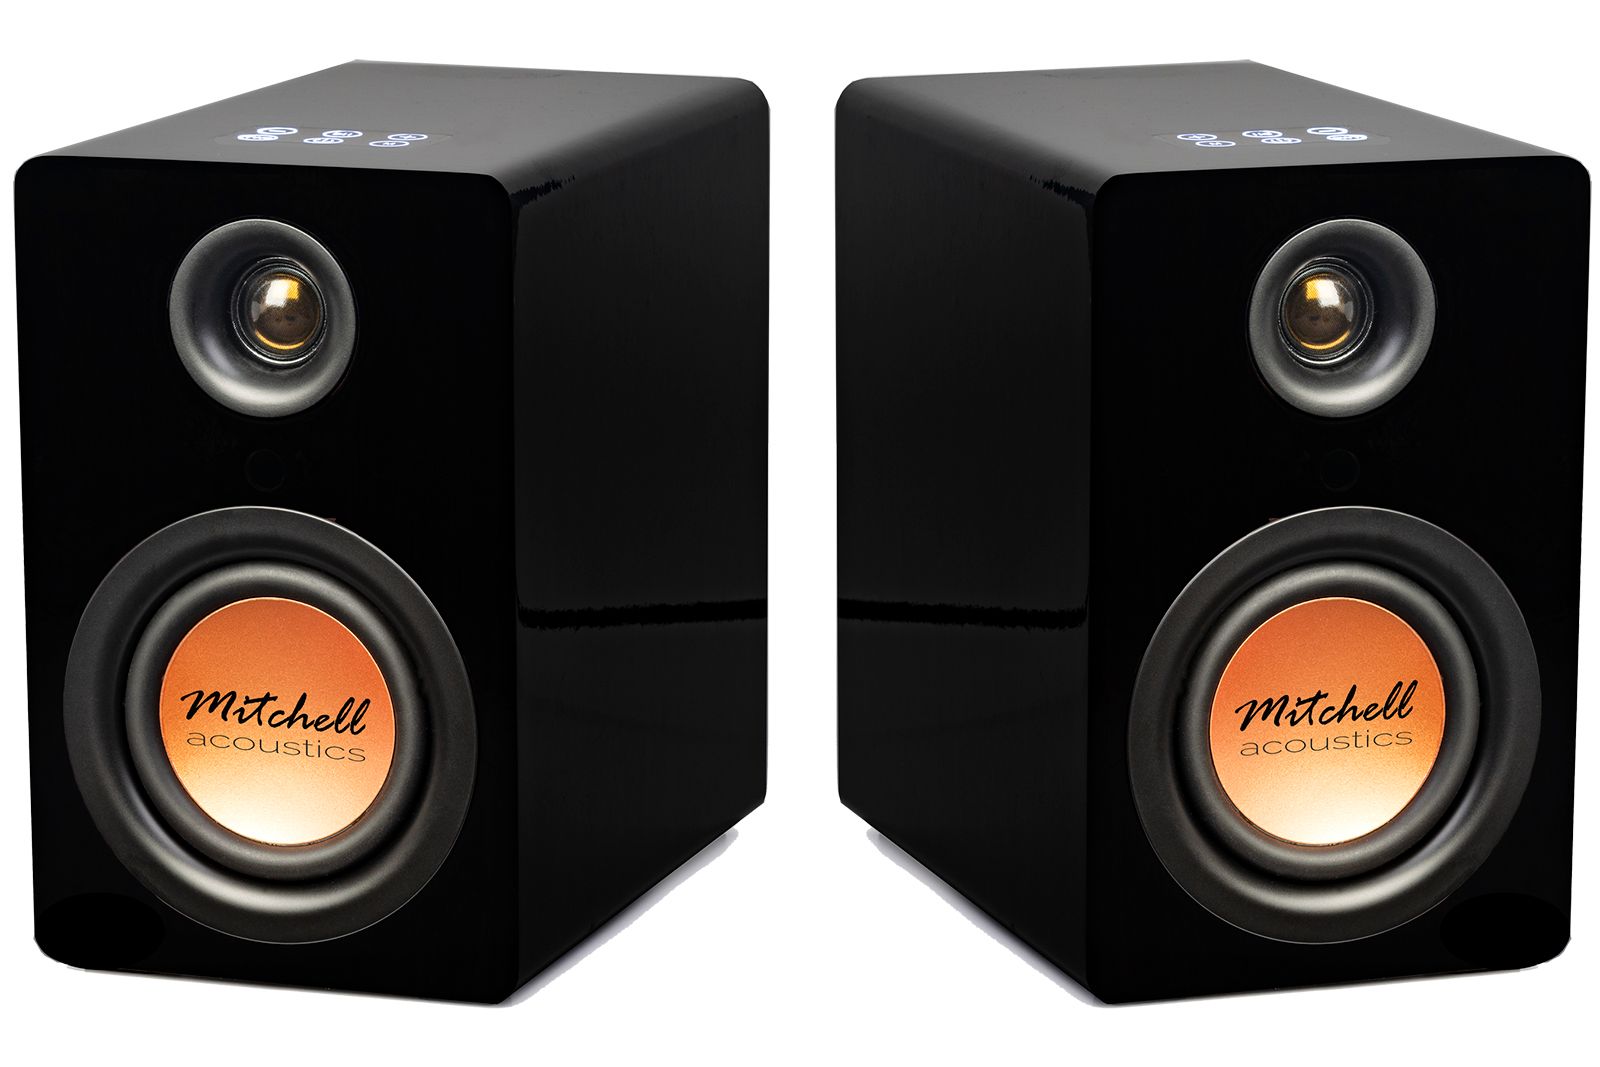 Mitchell Acoustics' true wireless uSTream One stereo speakers use Bluetooth for easy setup photo 2